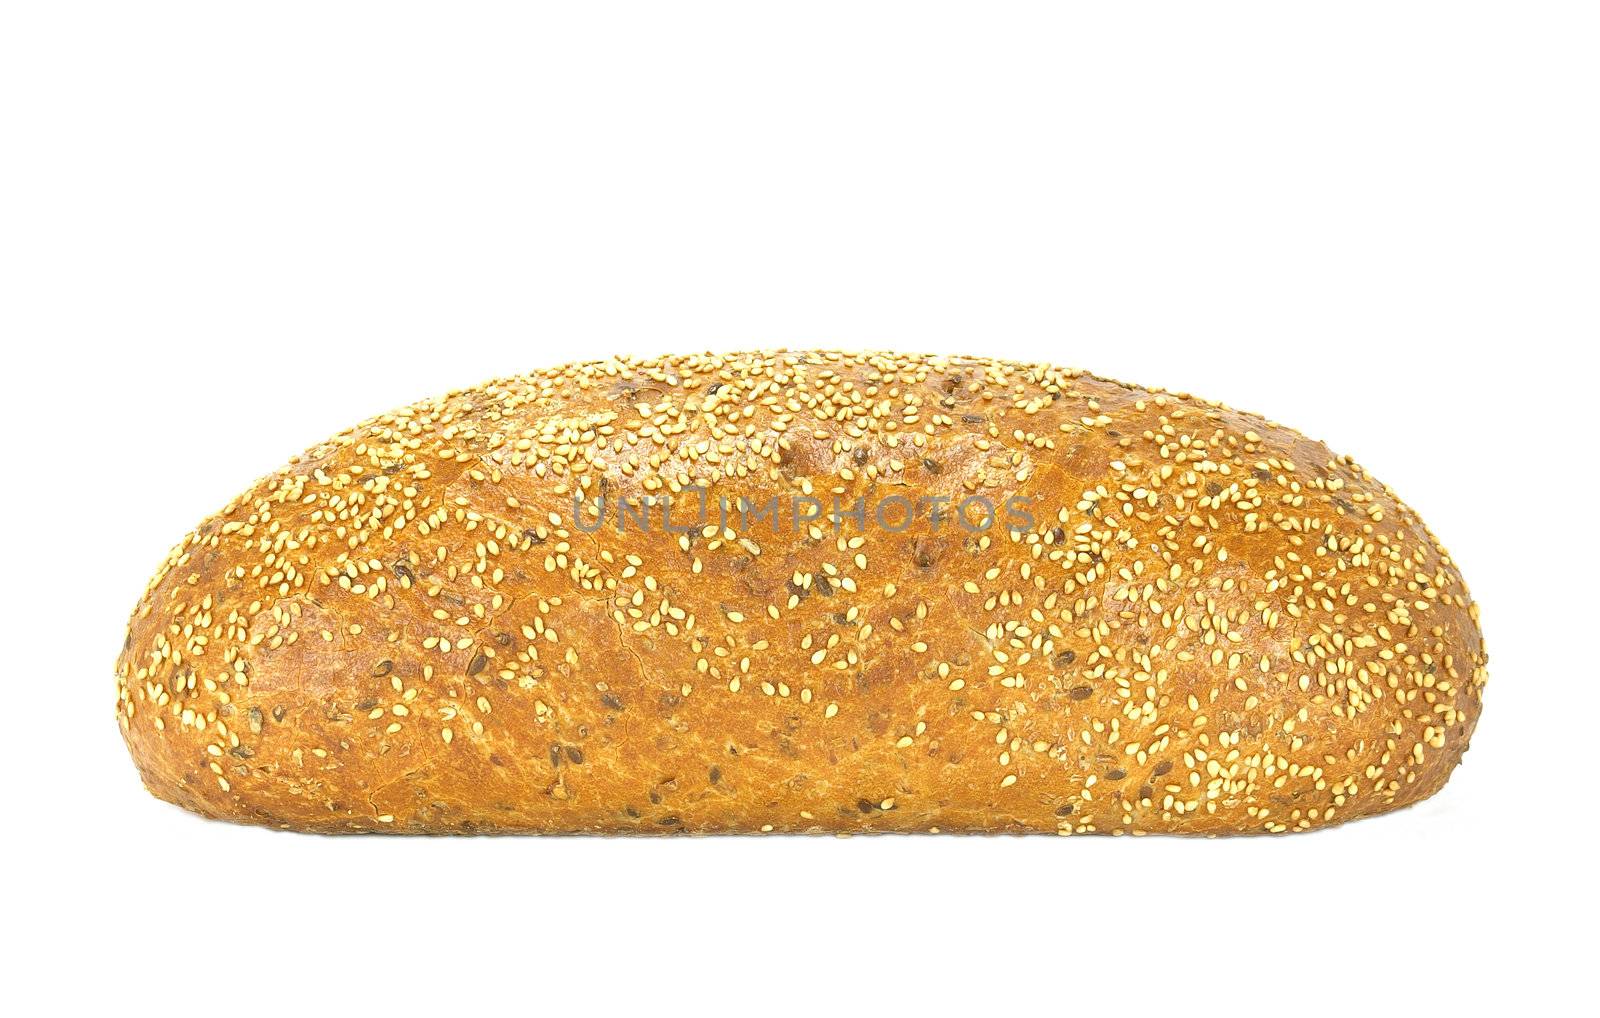 isolated loaf of baked bread with sesame seeds